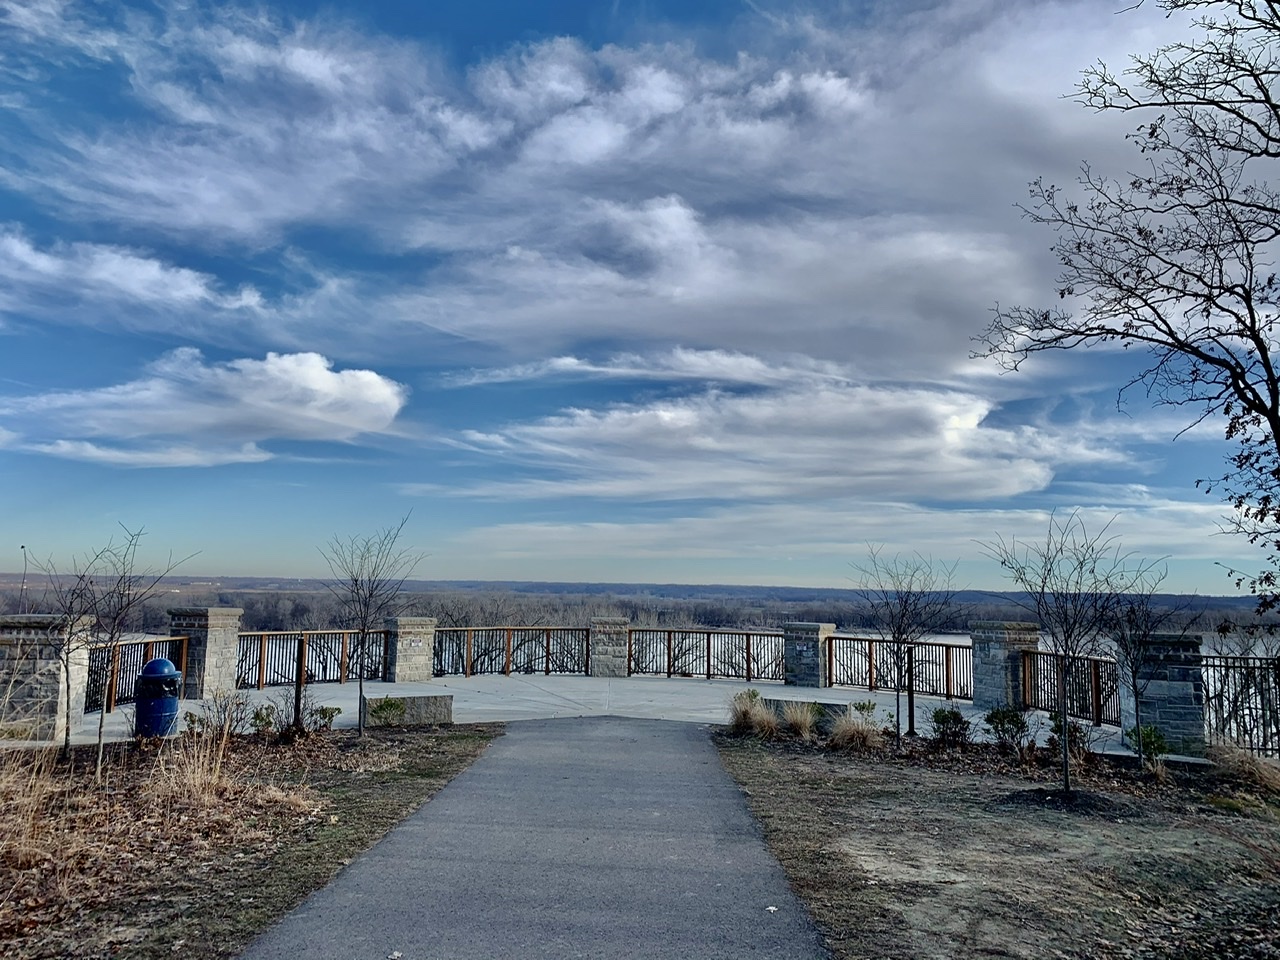 Clouds and blue sky above overlook at Cliff Cave Park